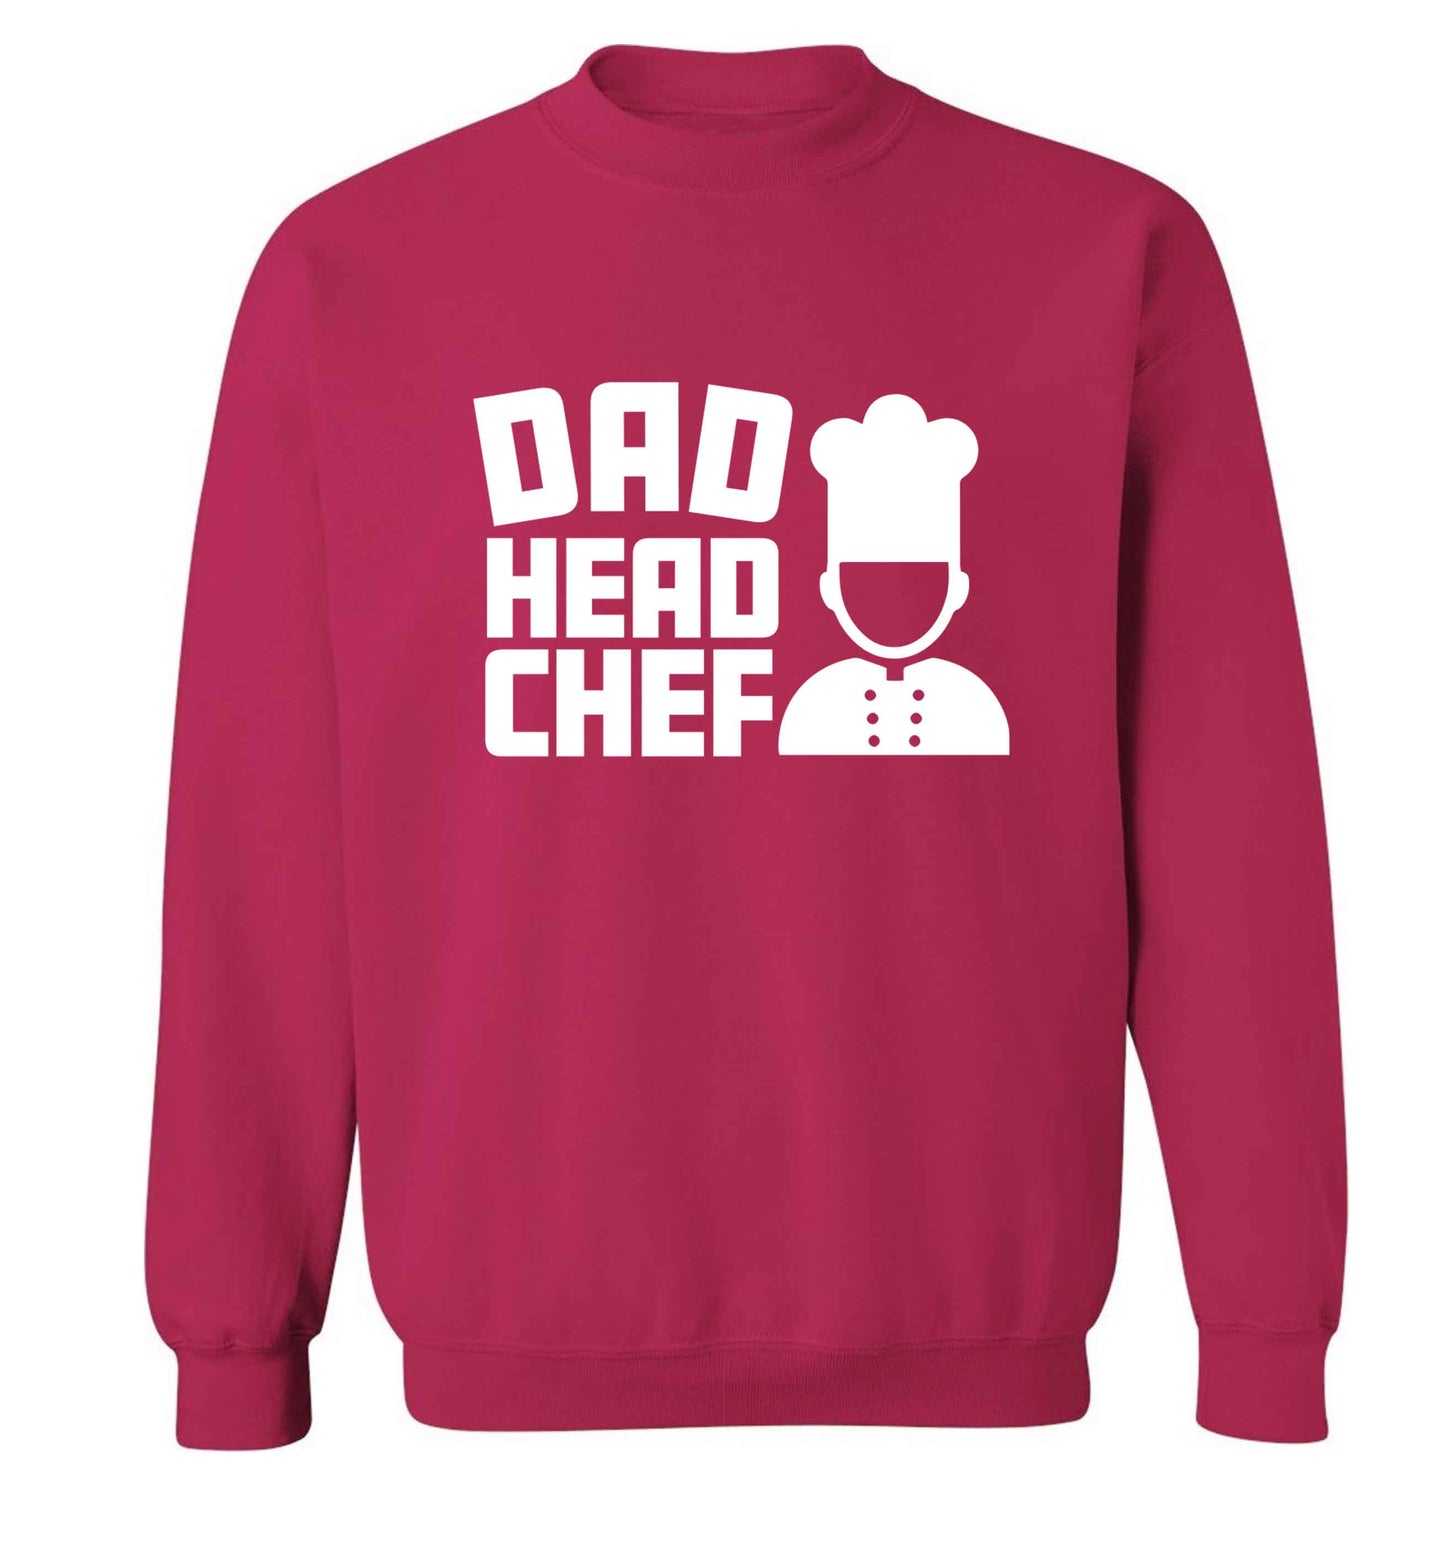 Dad head chef adult's unisex pink sweater 2XL